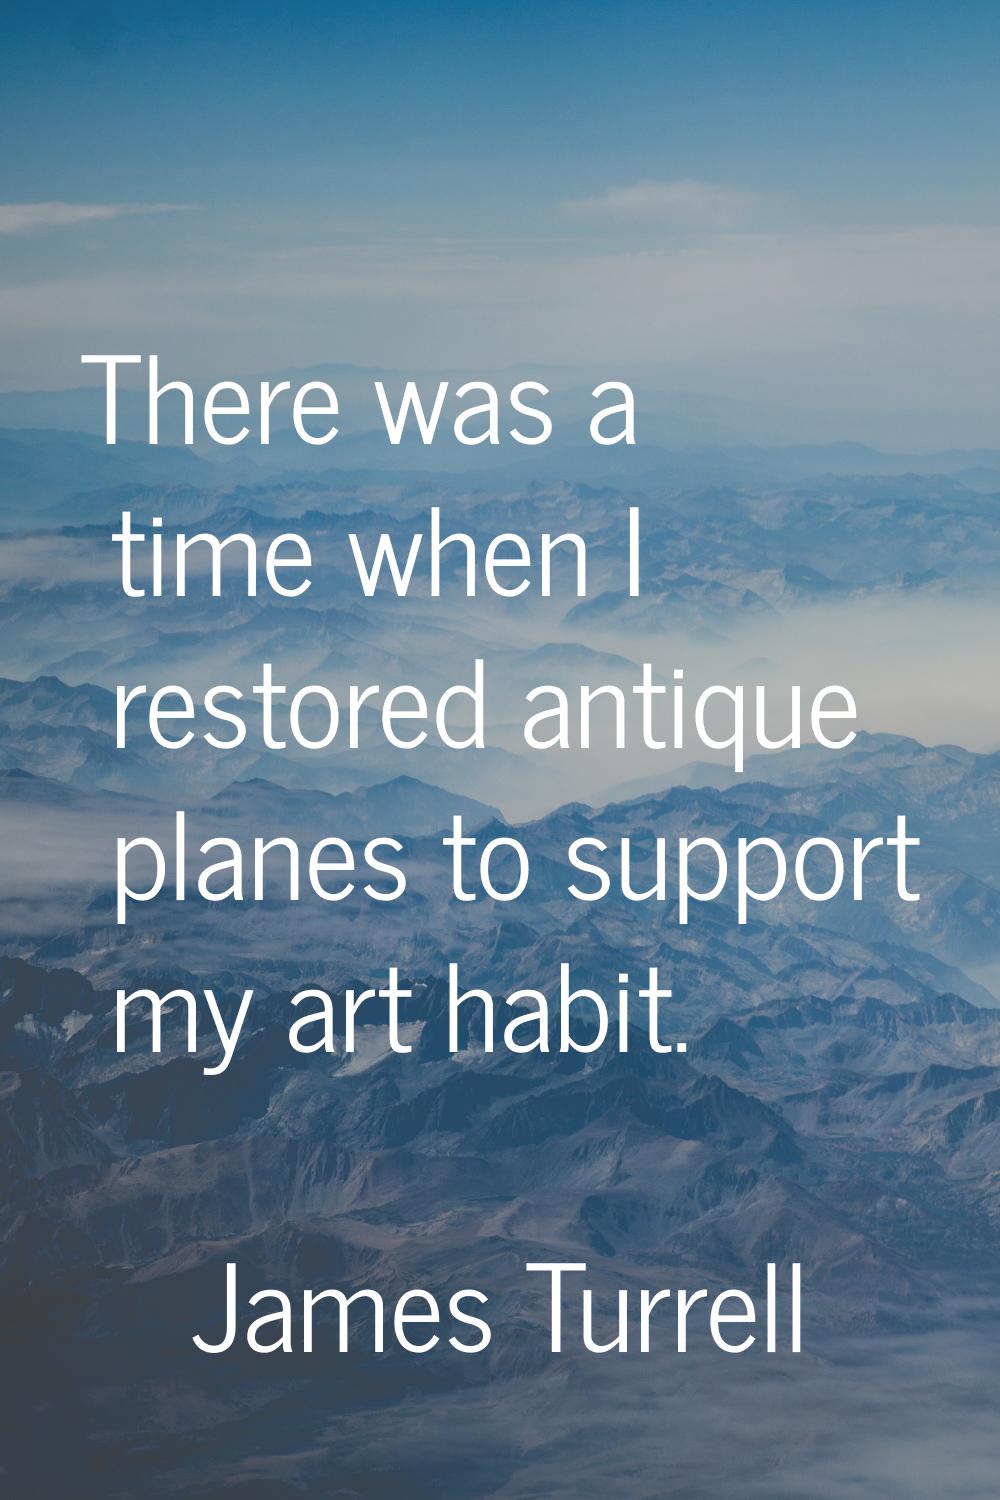 There was a time when I restored antique planes to support my art habit.